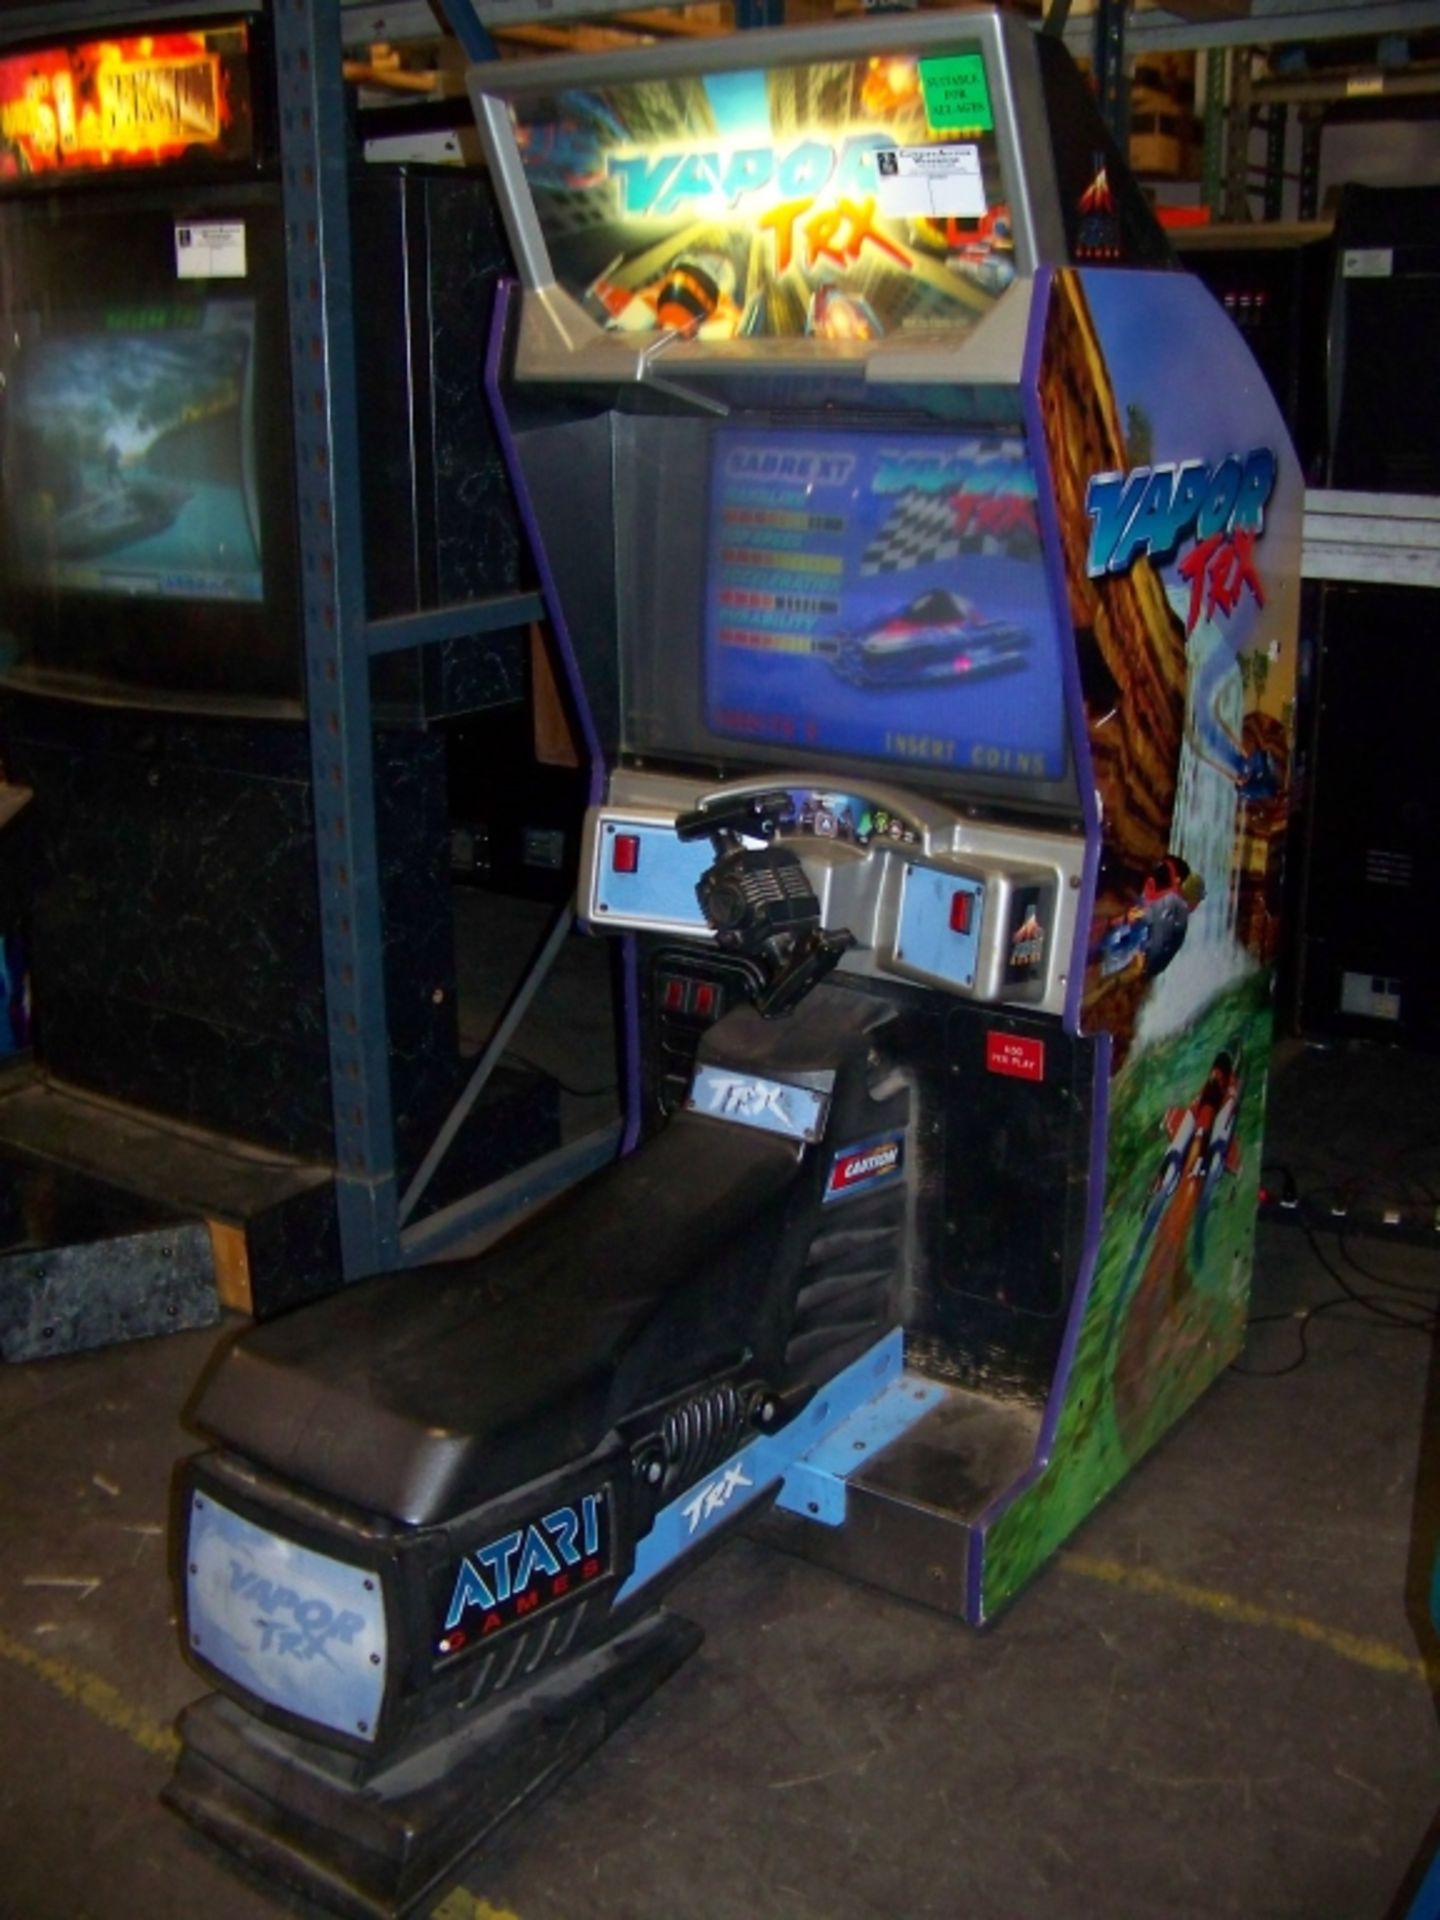 VAPOR TRX RACING ARCADE GAME ATARI Item is in used condition. Evidence of wear and commercial